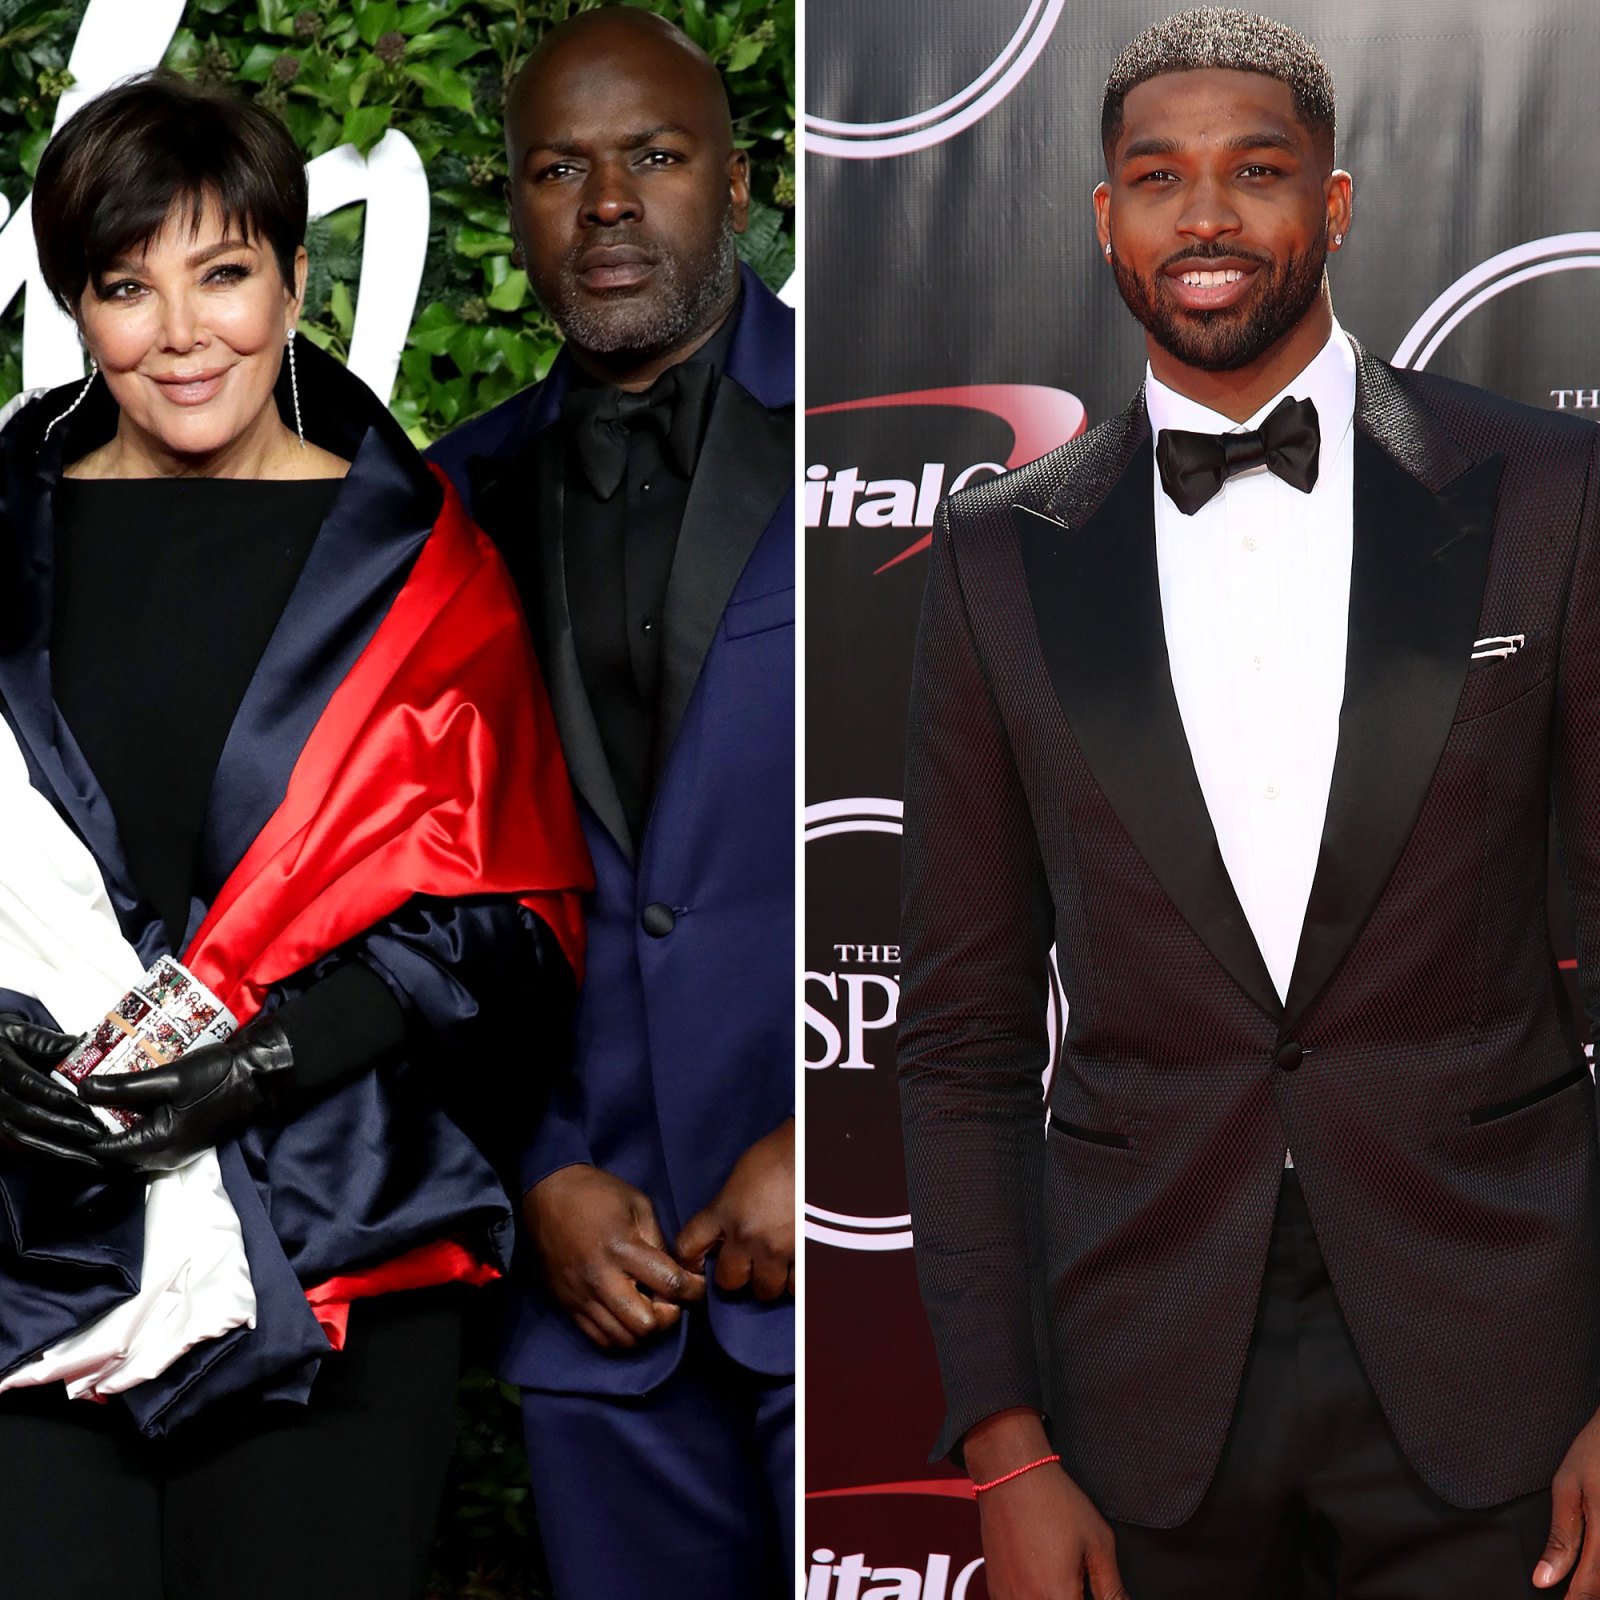 Kris Jenner’s BF Corey Gamble Supports Tristan Thompson Amid Paternity News